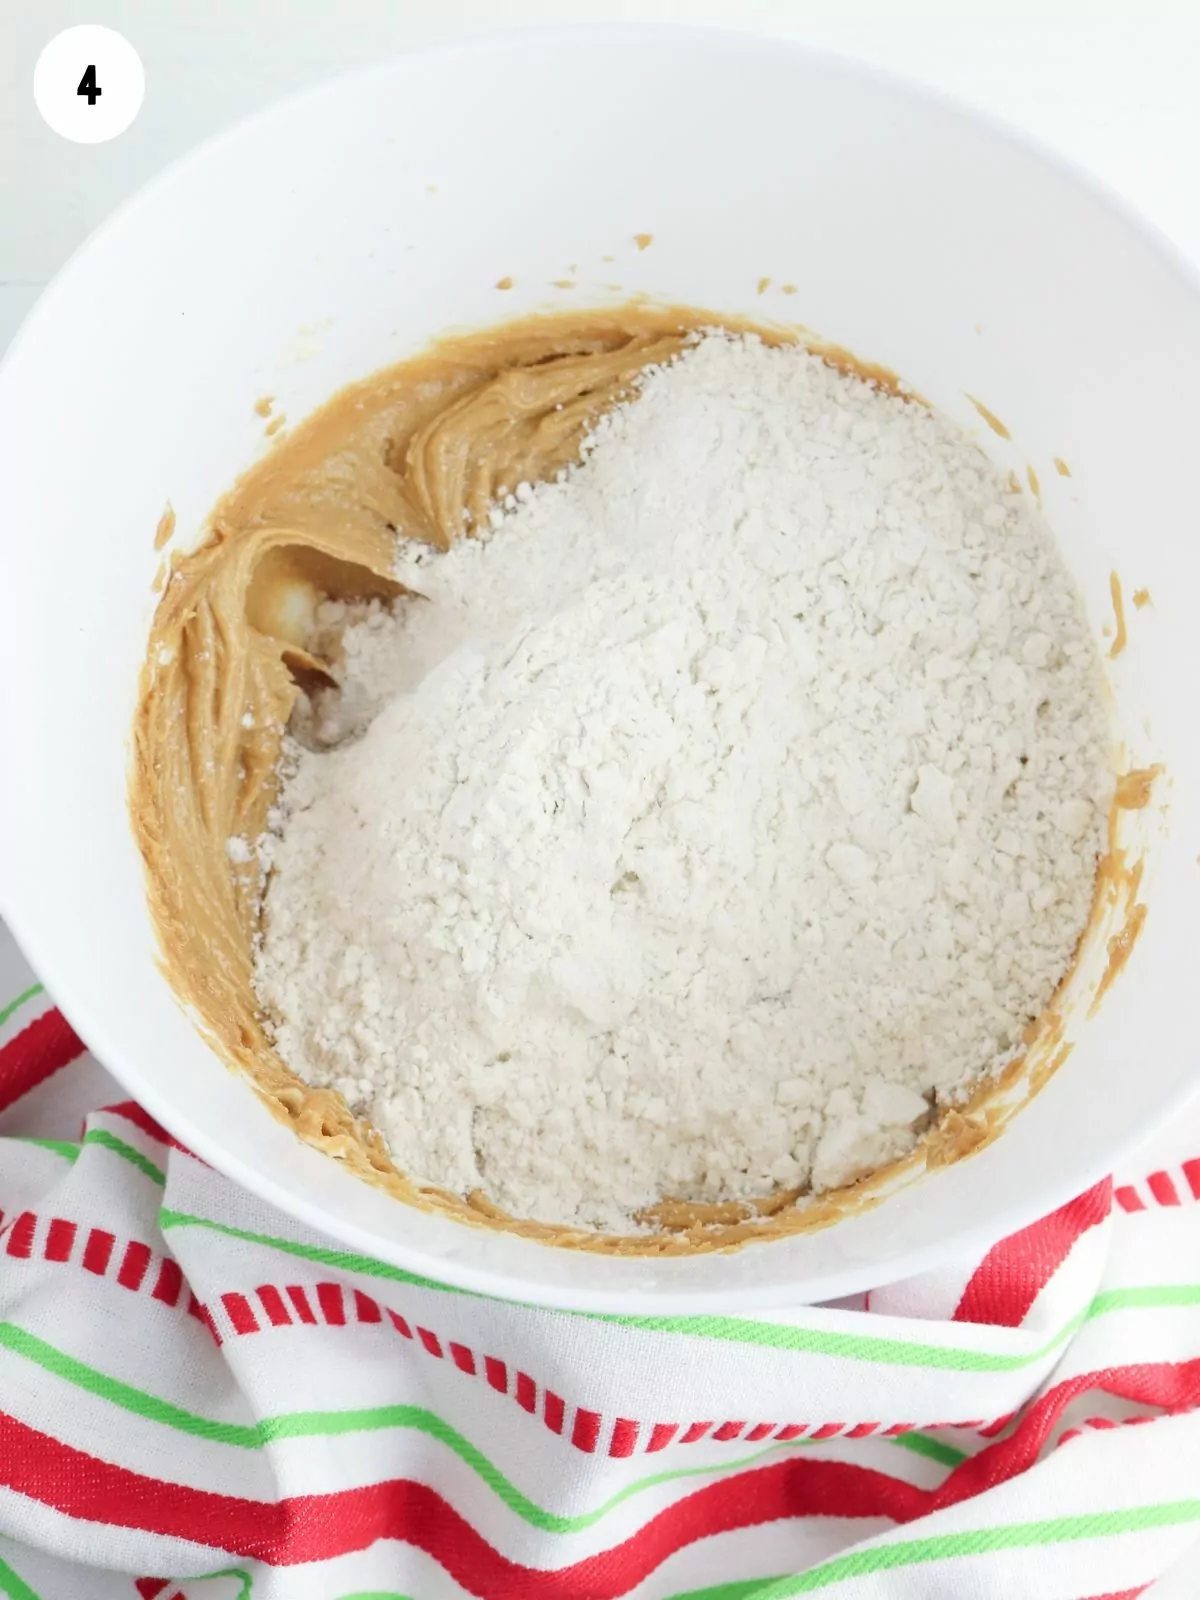 dry ingredients combined with sugar, butter ingredients.